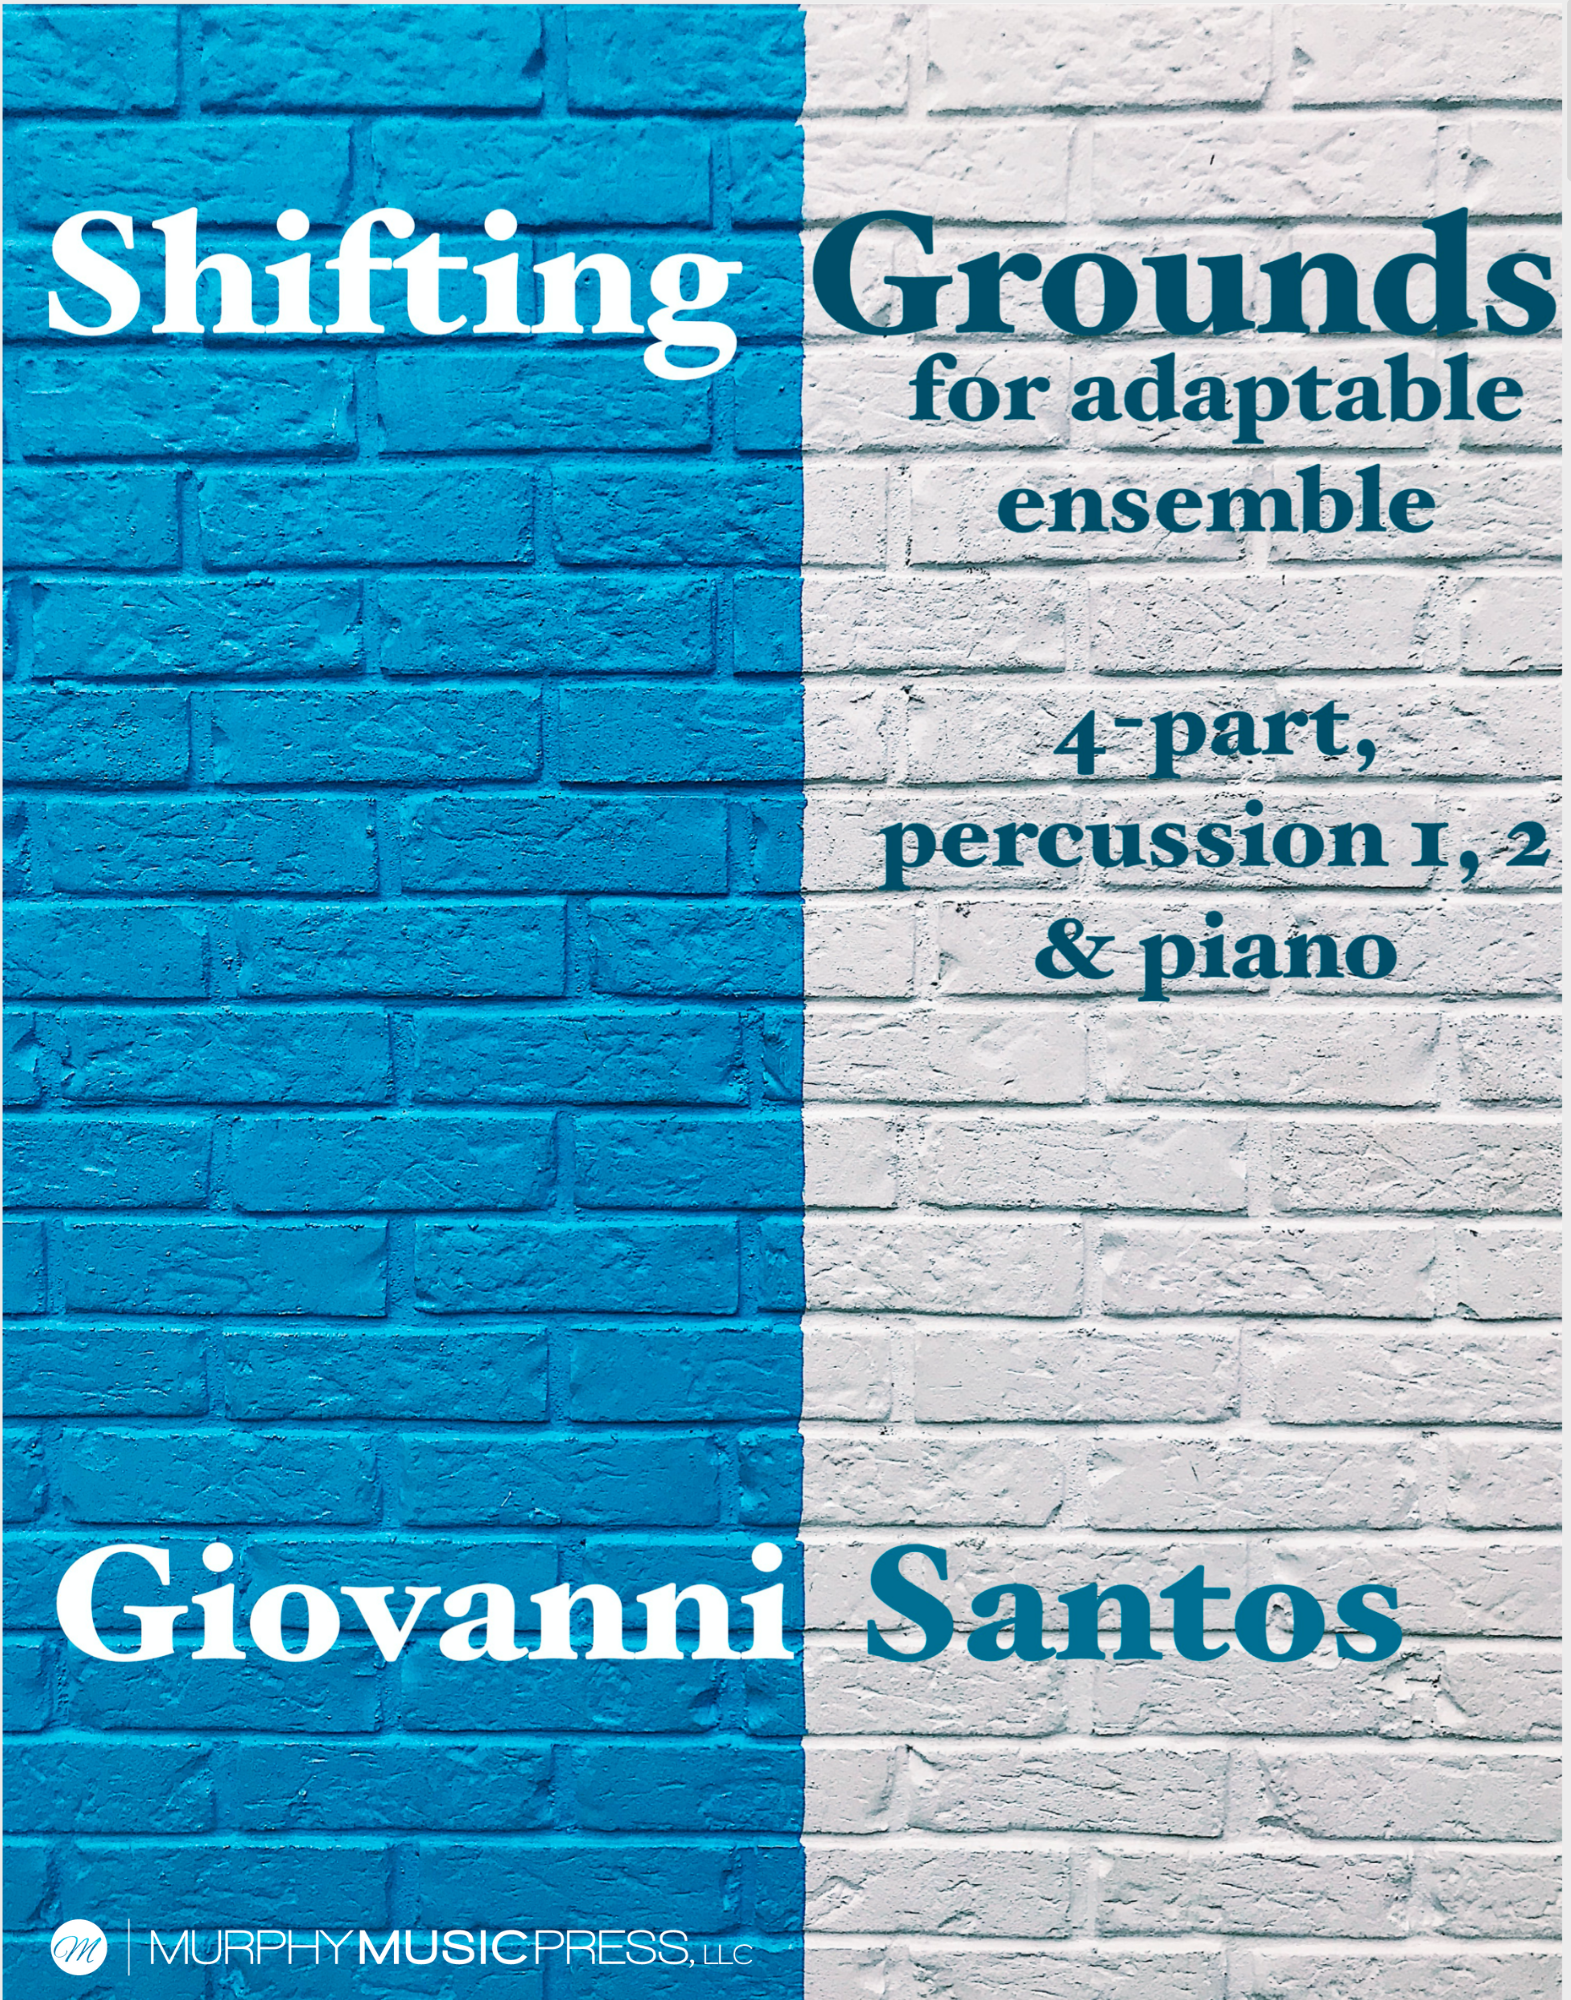 Shifting Grounds by Giovanni Santos